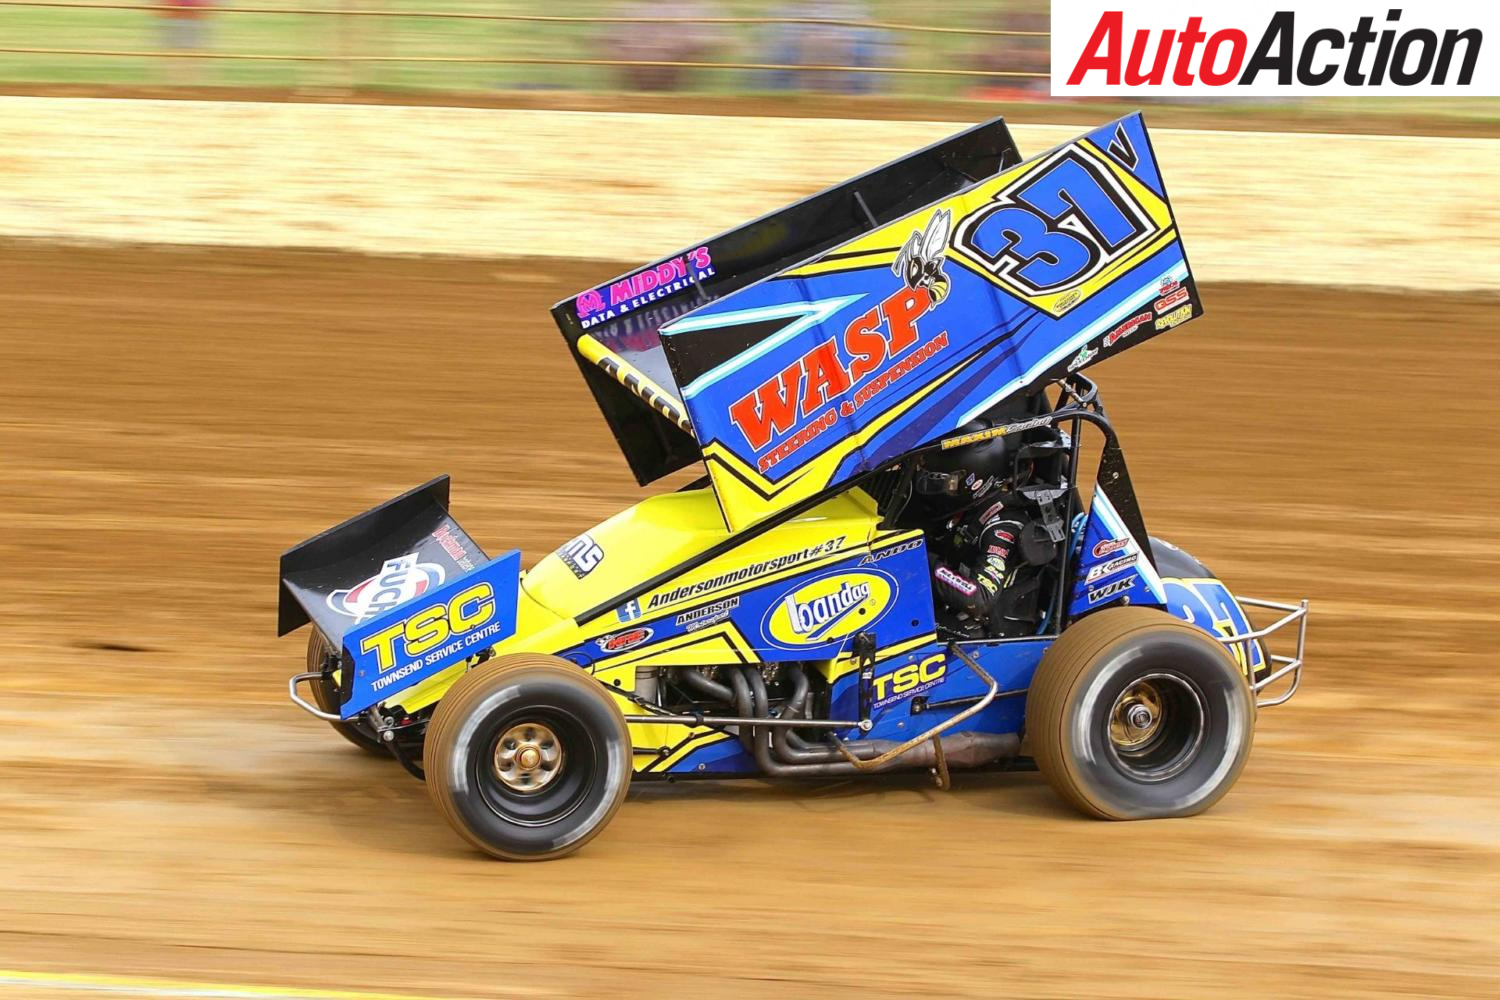 WORLD SERIES SPRINTCARS WIDE OPEN Auto Action